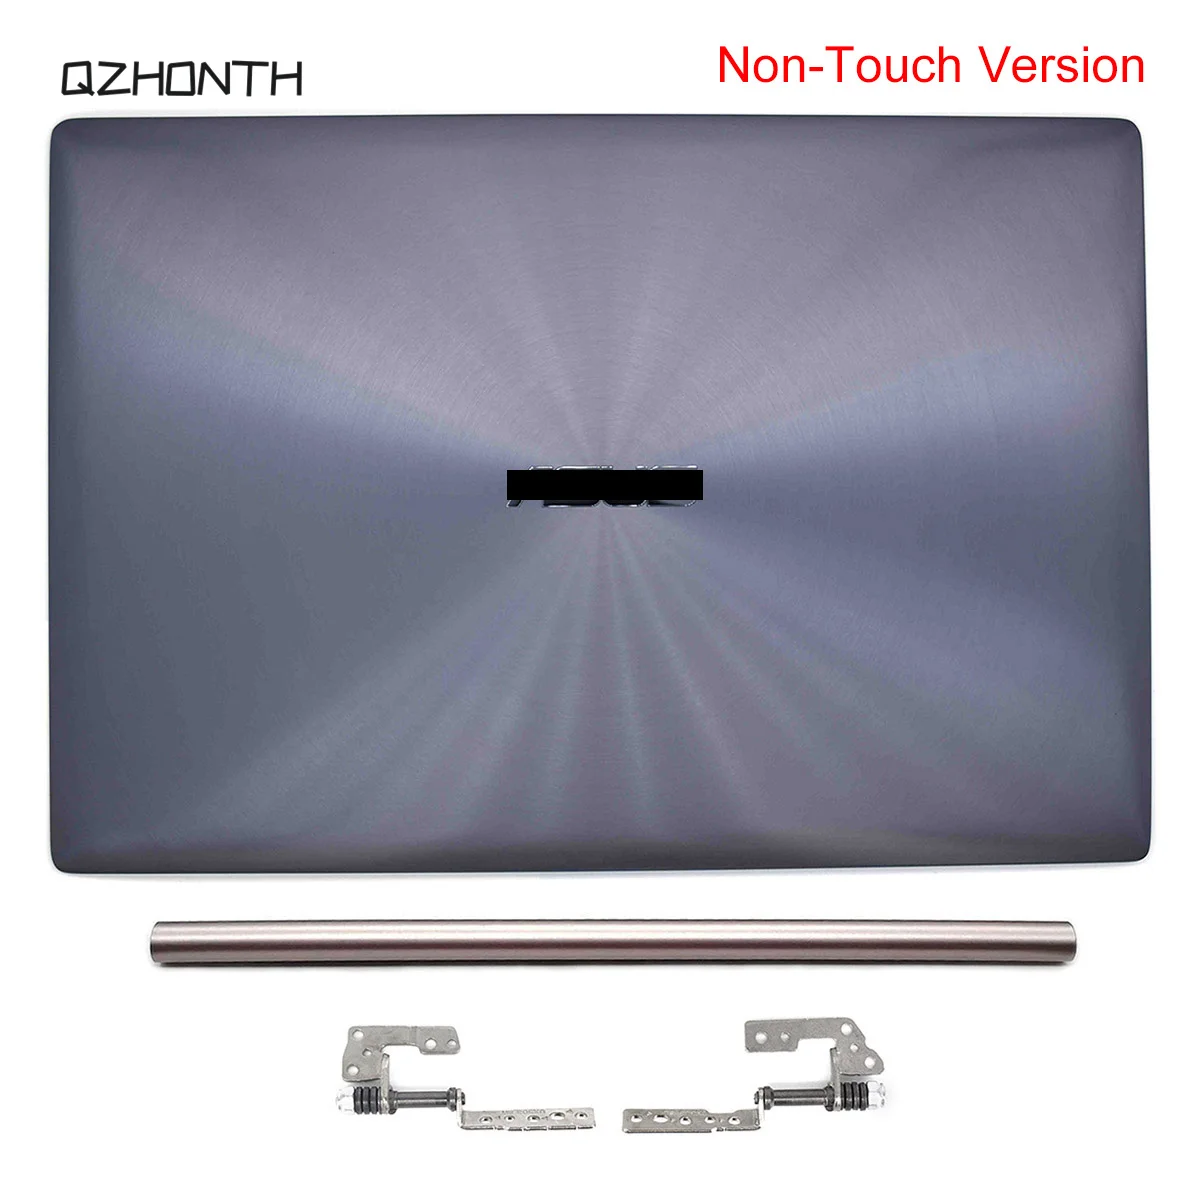 

New For ASUS UX303 UX303L UX303U U303L UX303LA UX303LN LCD Back Cover + Hinges + Cover Gray Non-Touch Version